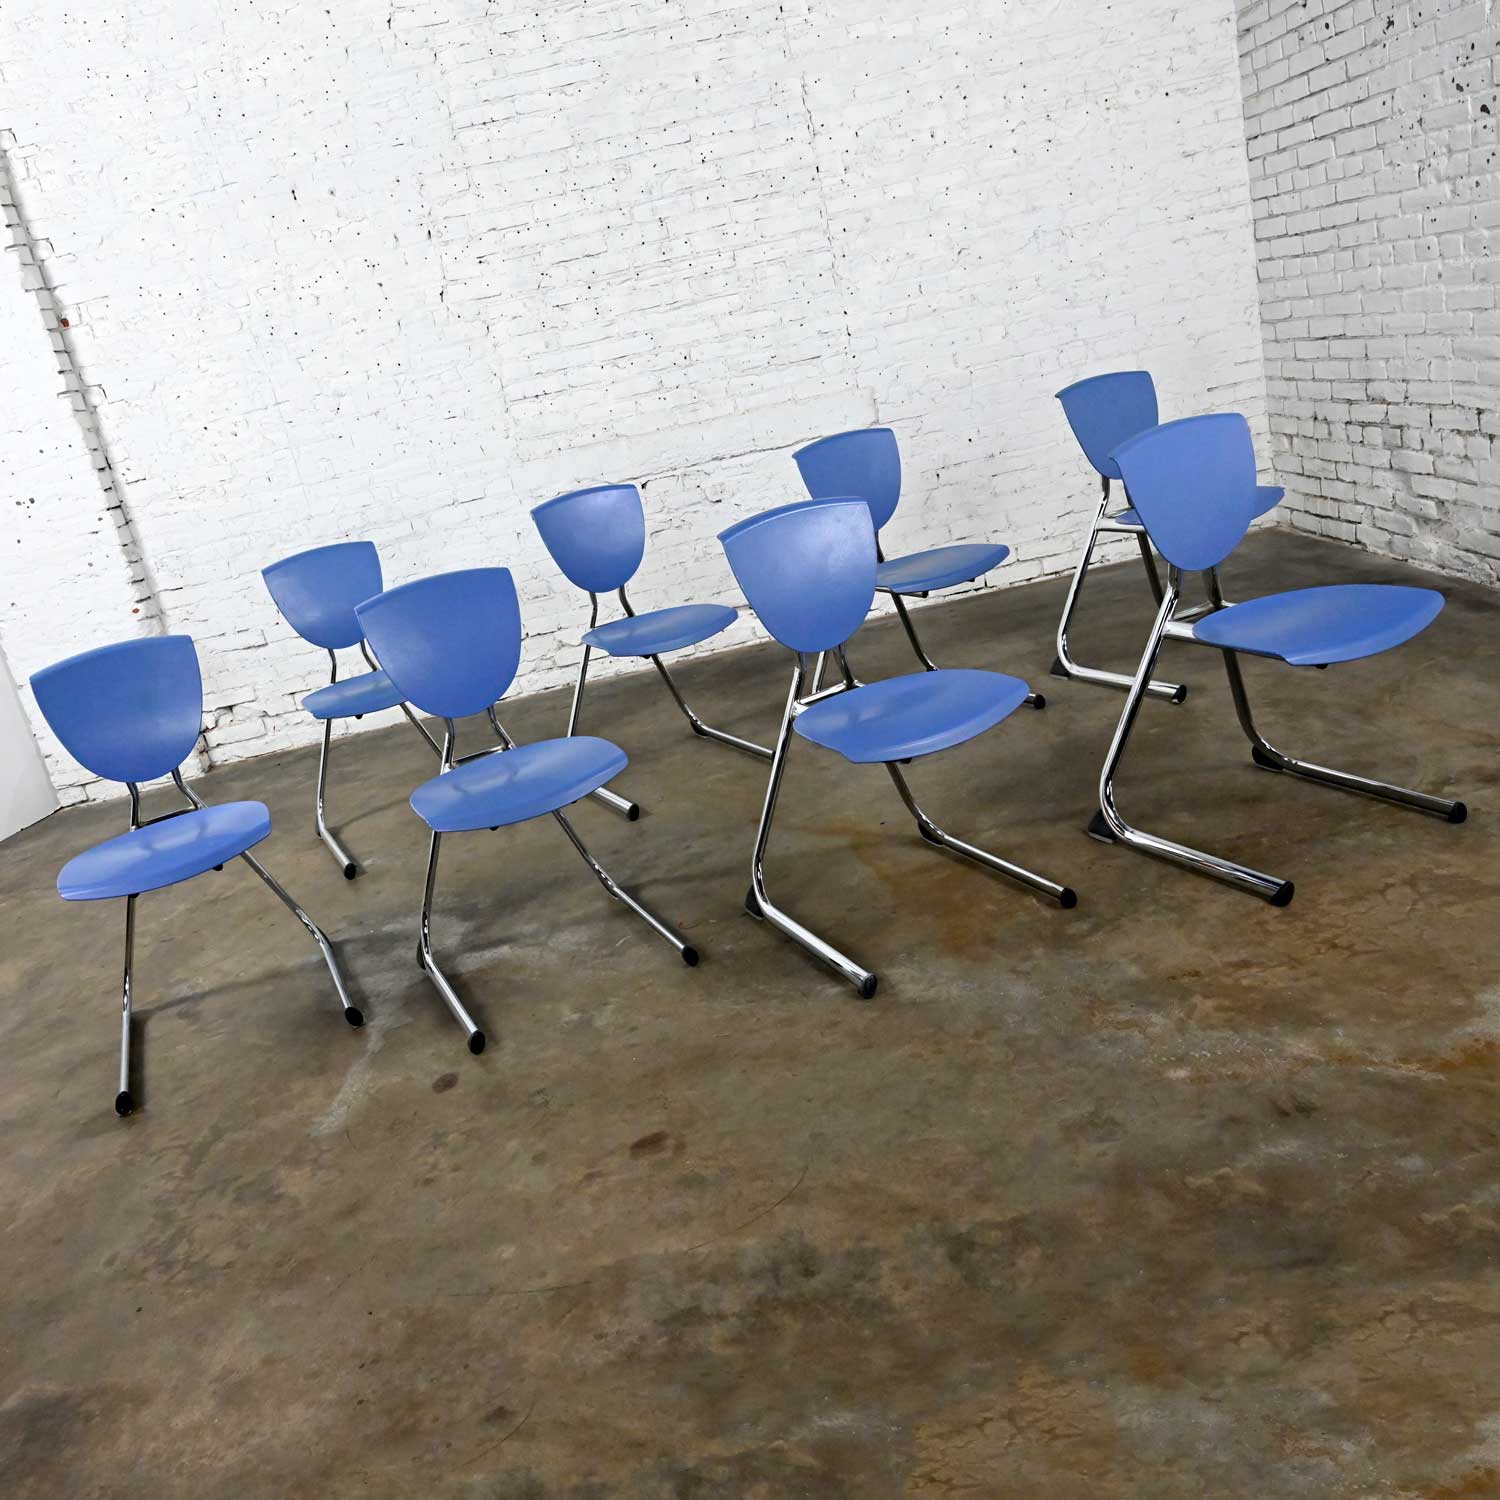 8 Vintage Modern Light Blue Plastic & Chrome Reverse Cantilever Stacking Intellect Dining Chairs by KI Seating